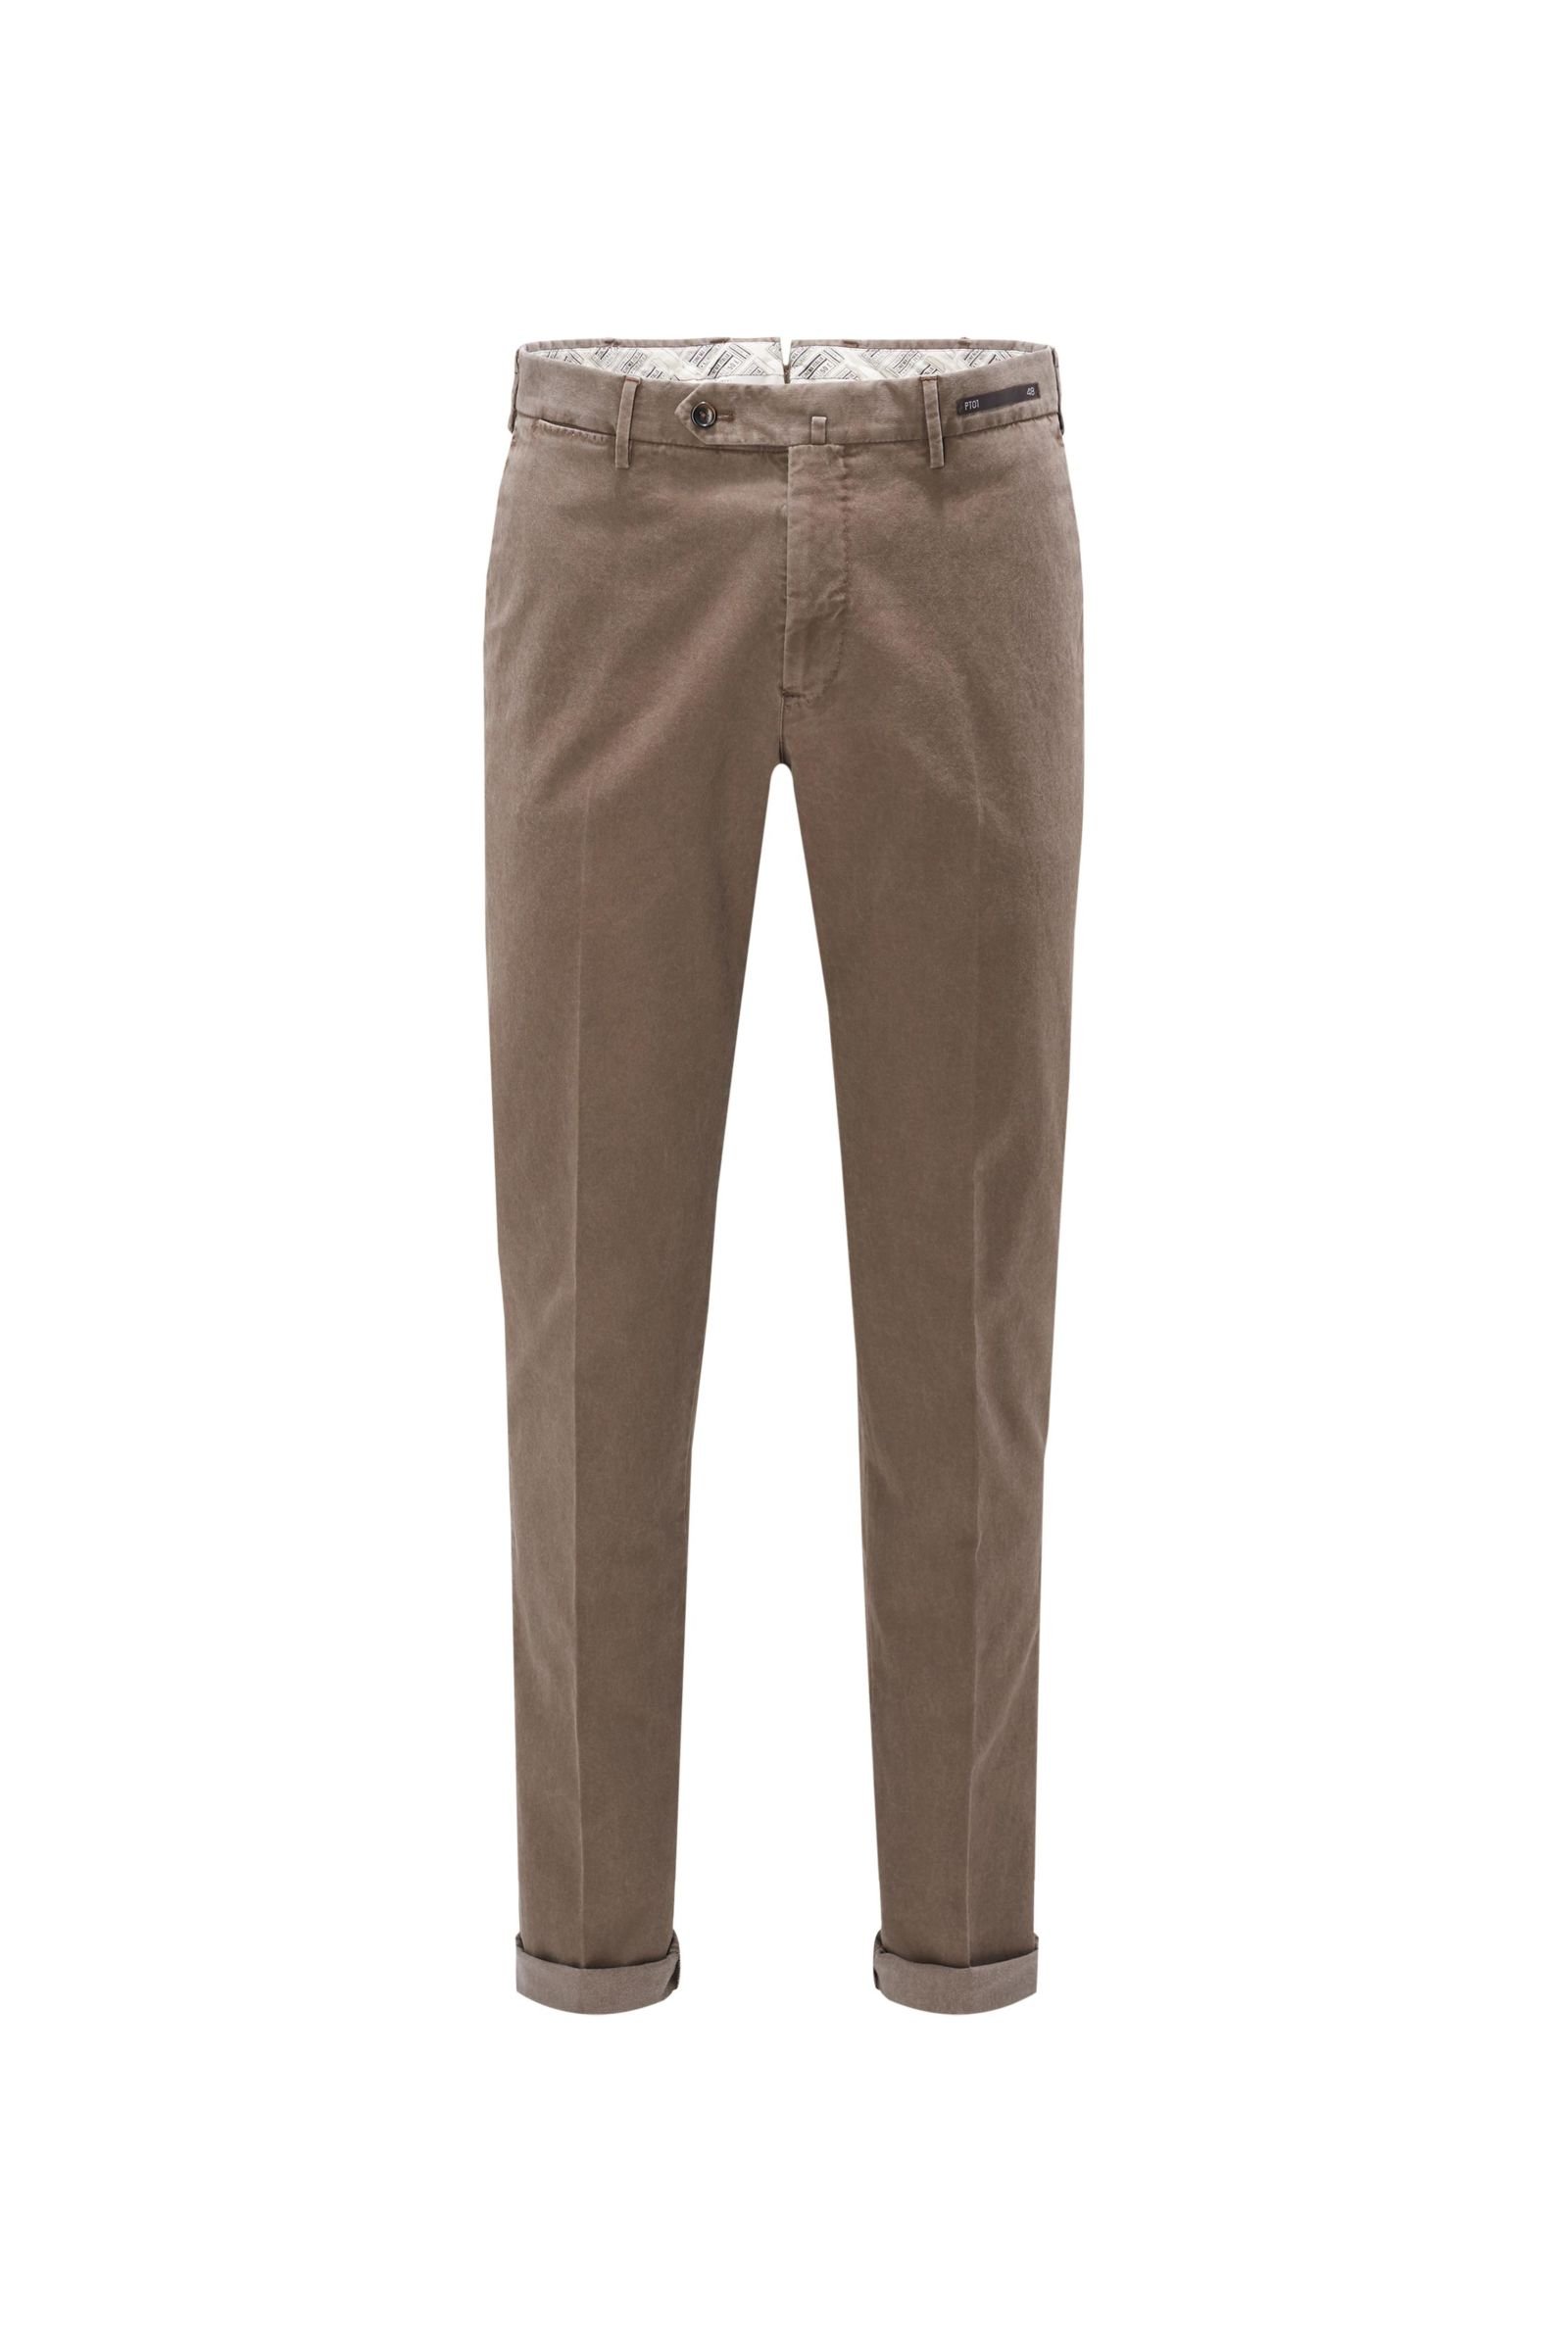 Cotton trousers 'Slim Fit' grey-brown